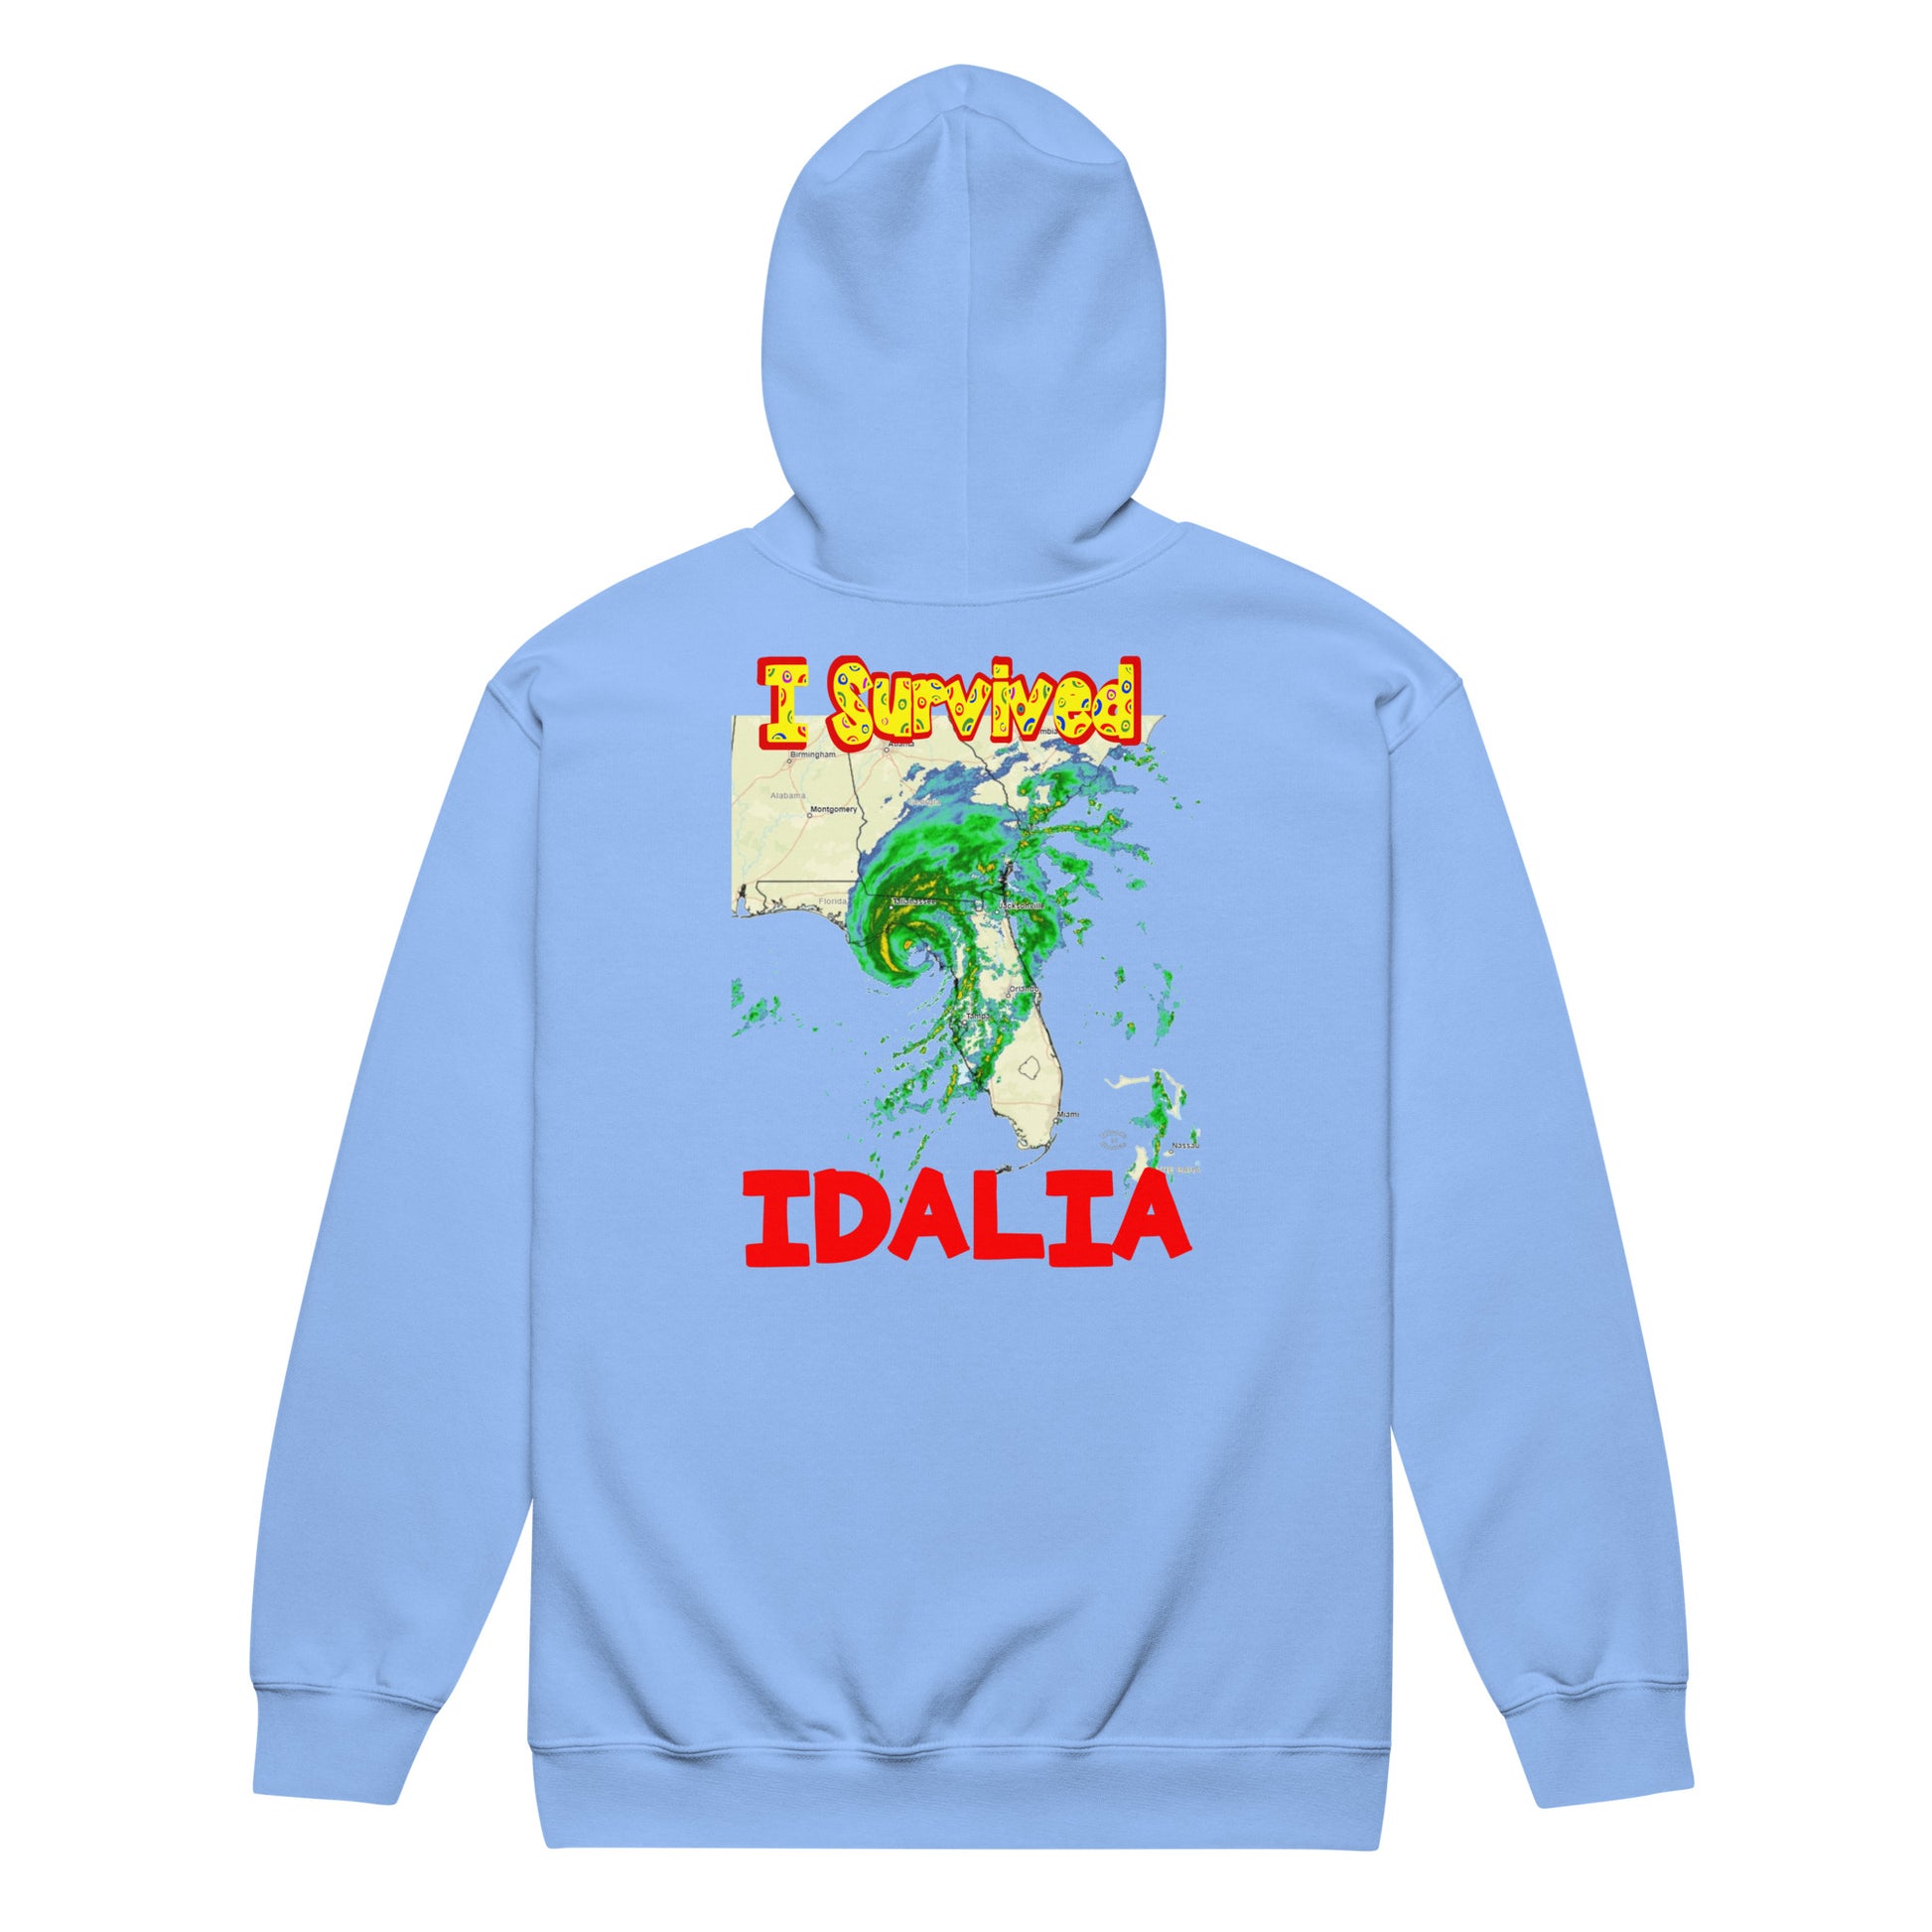 A cut out picture of a hoodie with back print design of I SURVIVED Hurricane IDALIA Unisex Heavy Blend Zip Hoodie in carolina blue